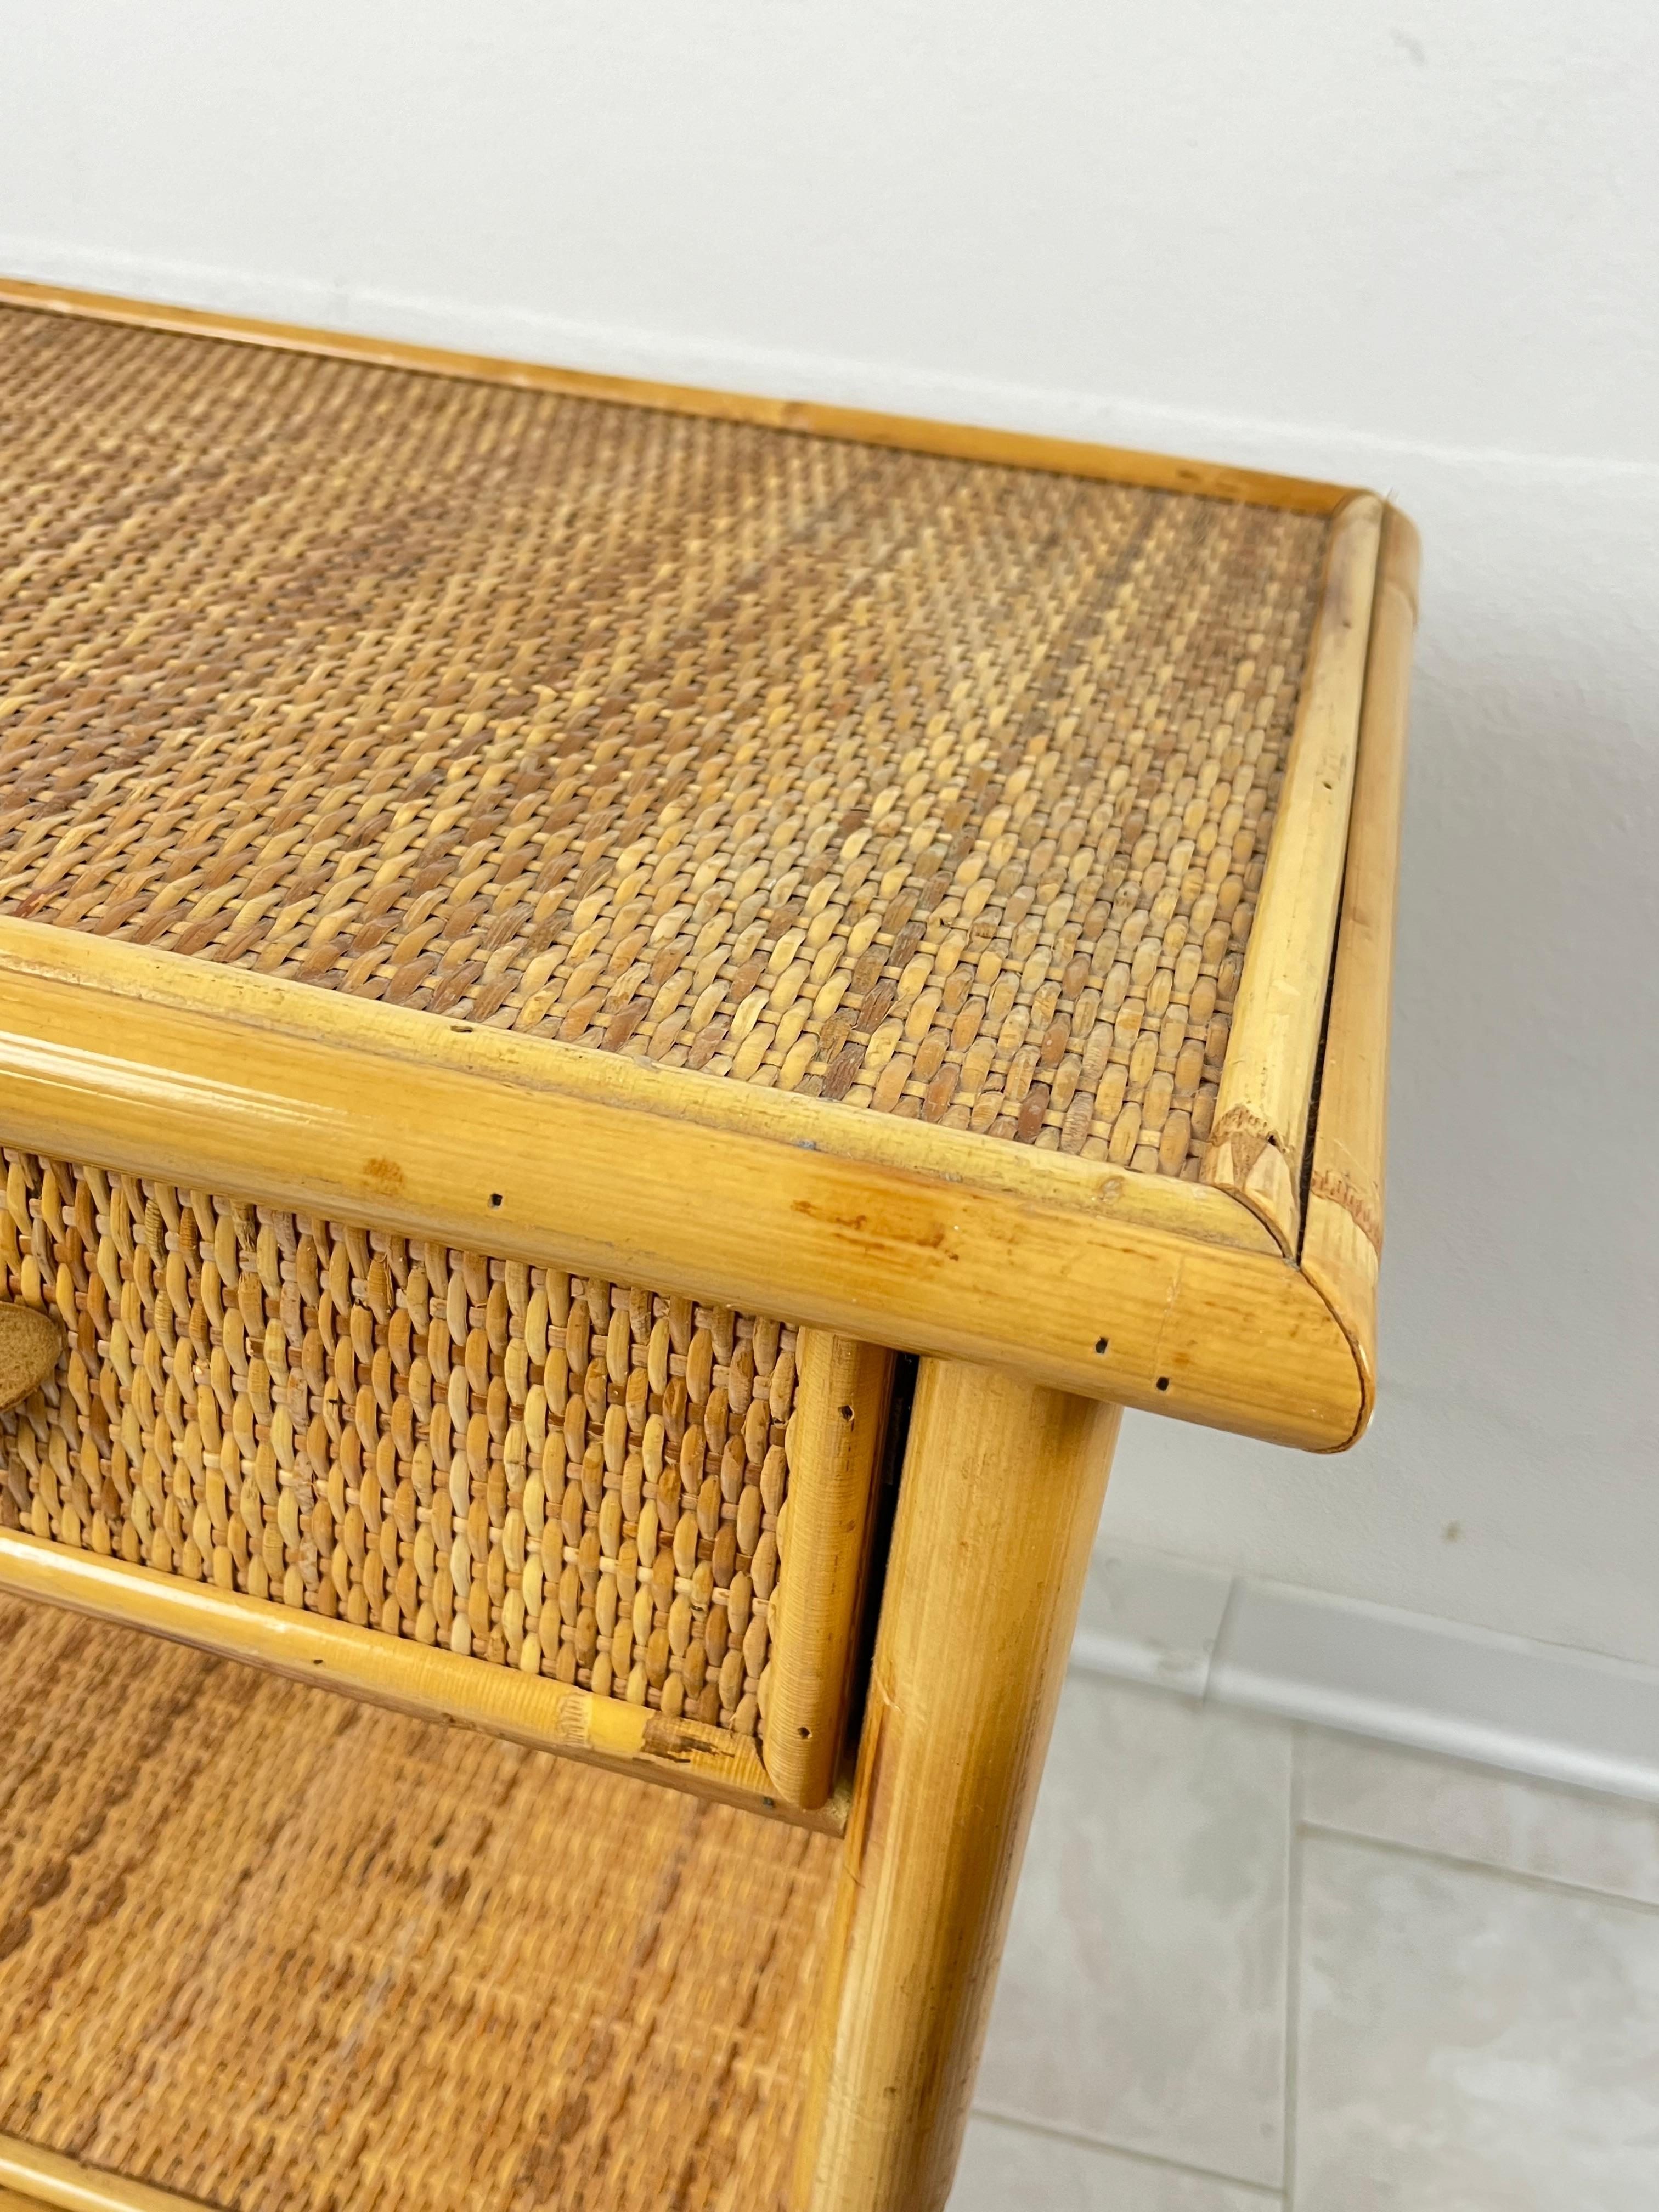 Set of 2 Mid-Century French Riviera Wicker And Rattan Bedside Tables 1960s For Sale 3